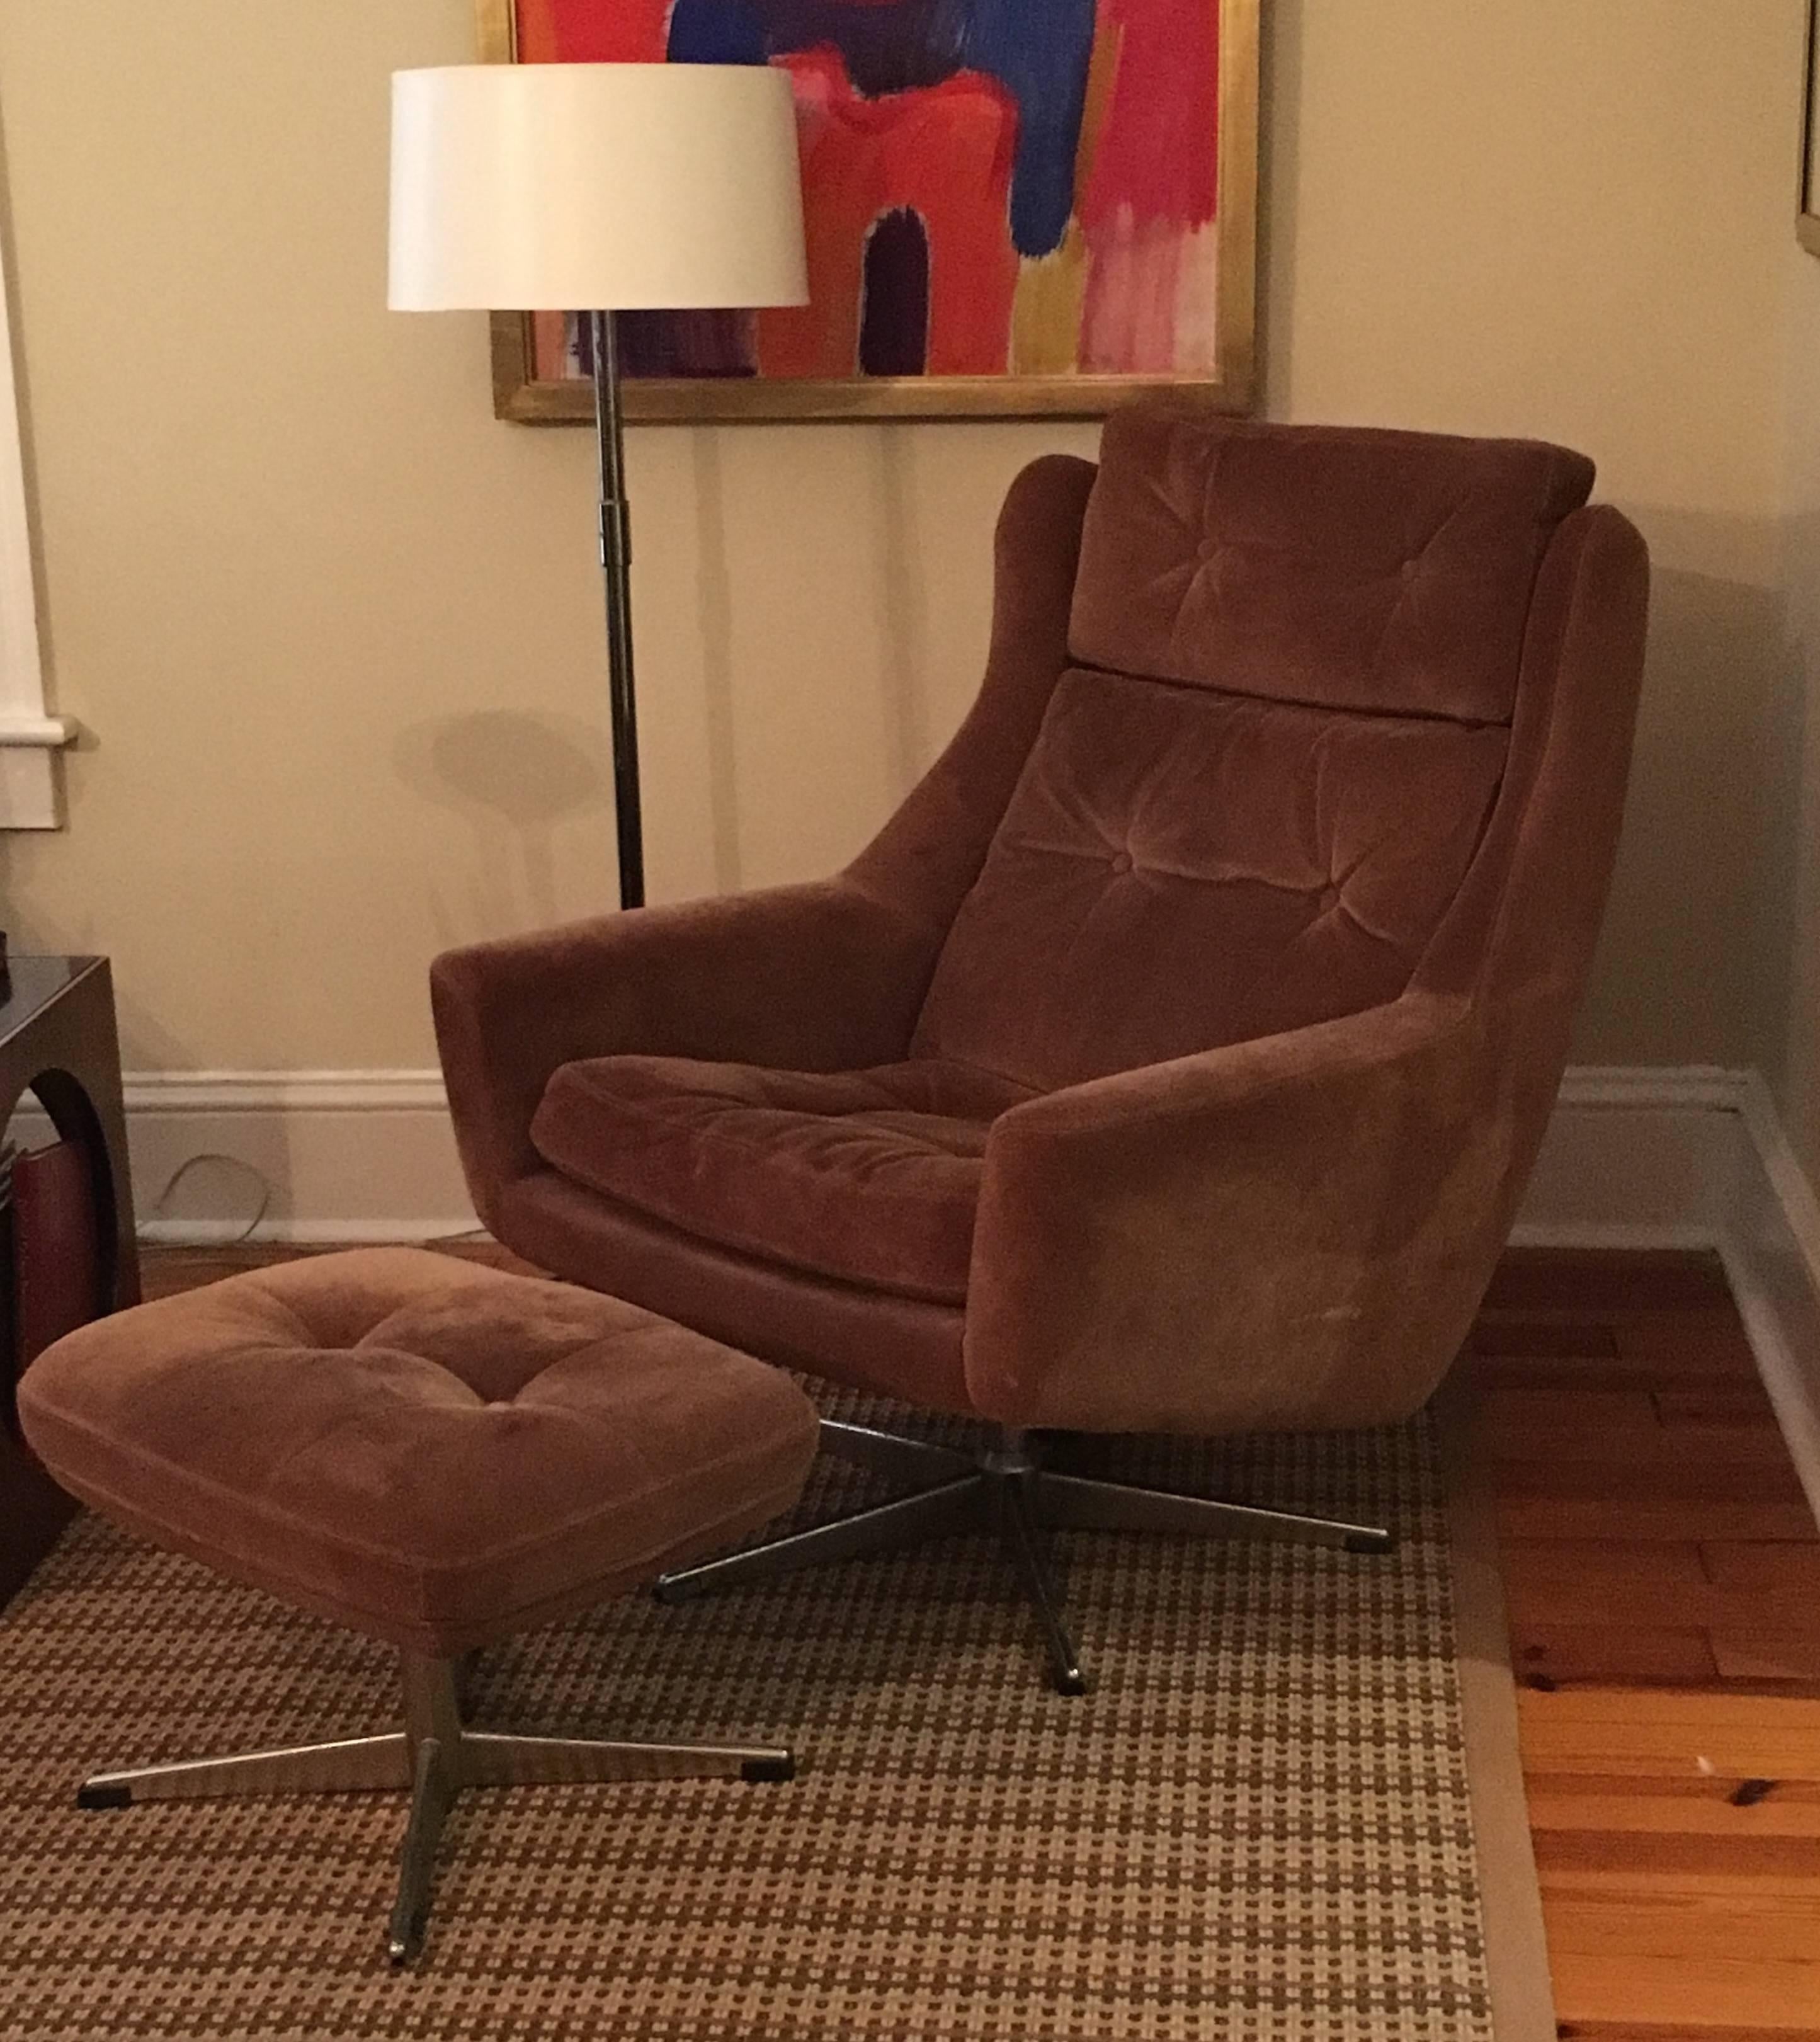 1960s Scandinavian modern adjustable recliner swivel lounge chair with five prong base and ottoman by John Stuart in the original suede upholstery; maker label and made in Denmark tags; upholstery in good vintage condition or can be